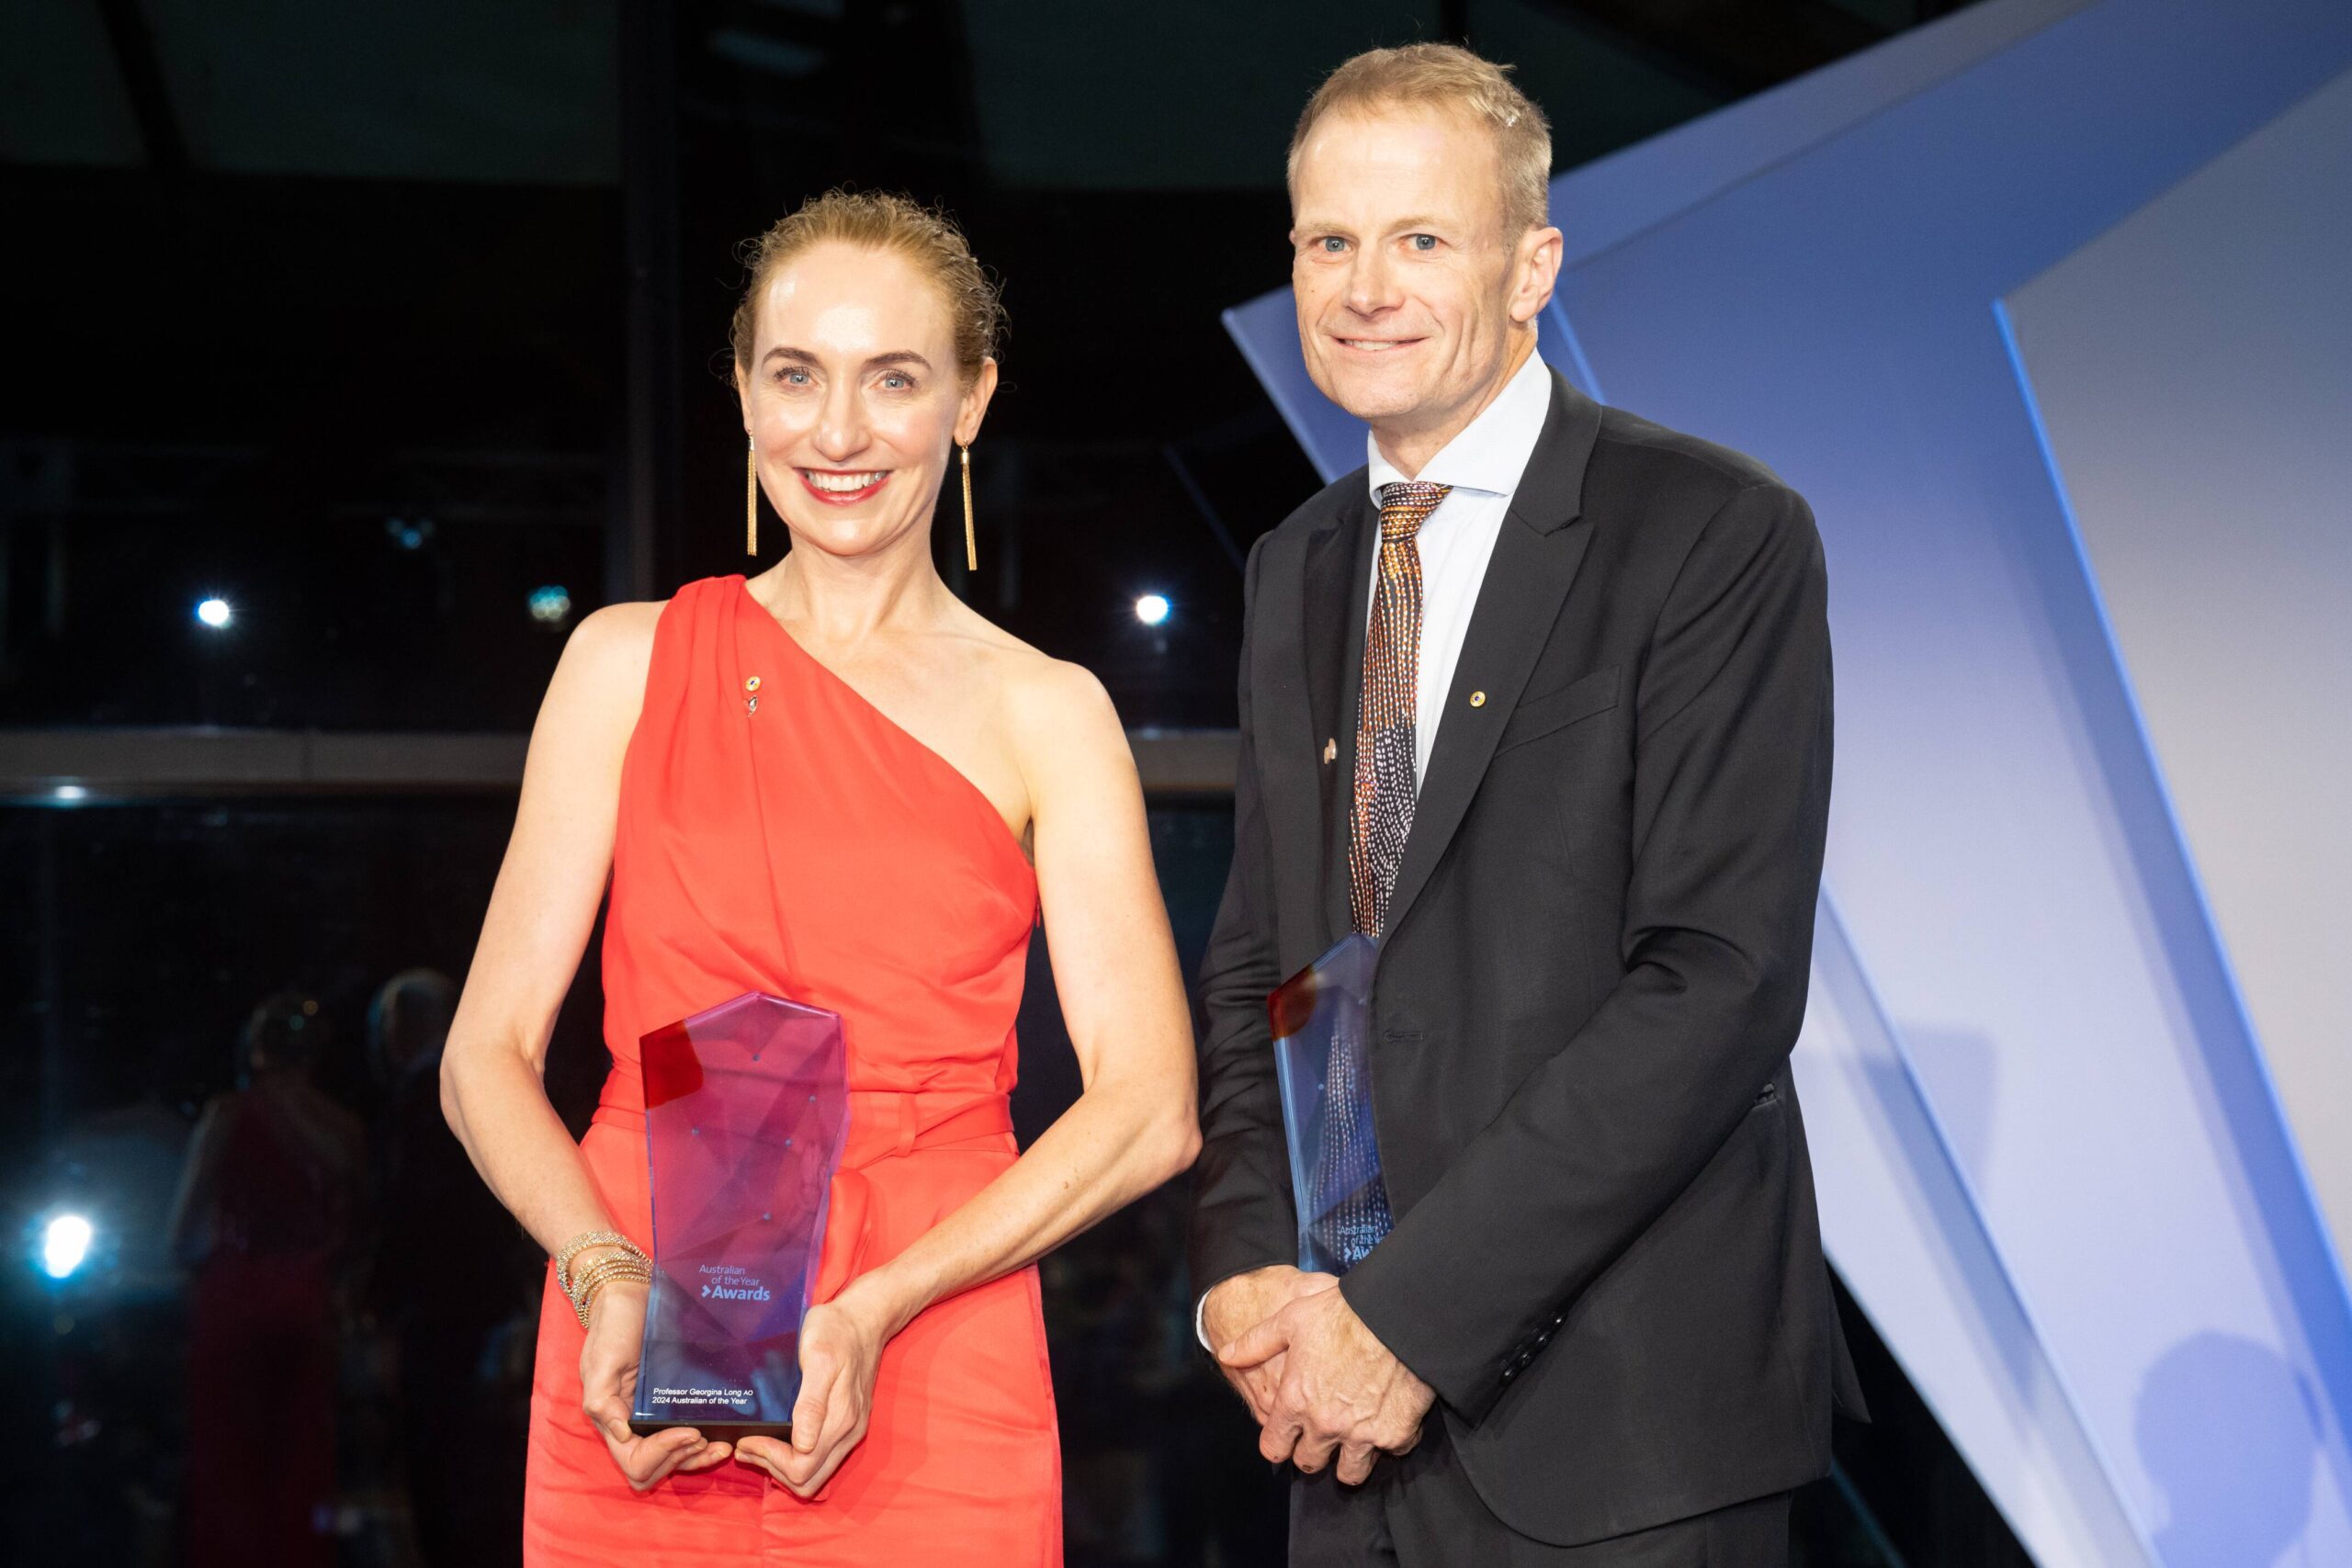 World leading pathologist and oncologist named joint Australians of the Year